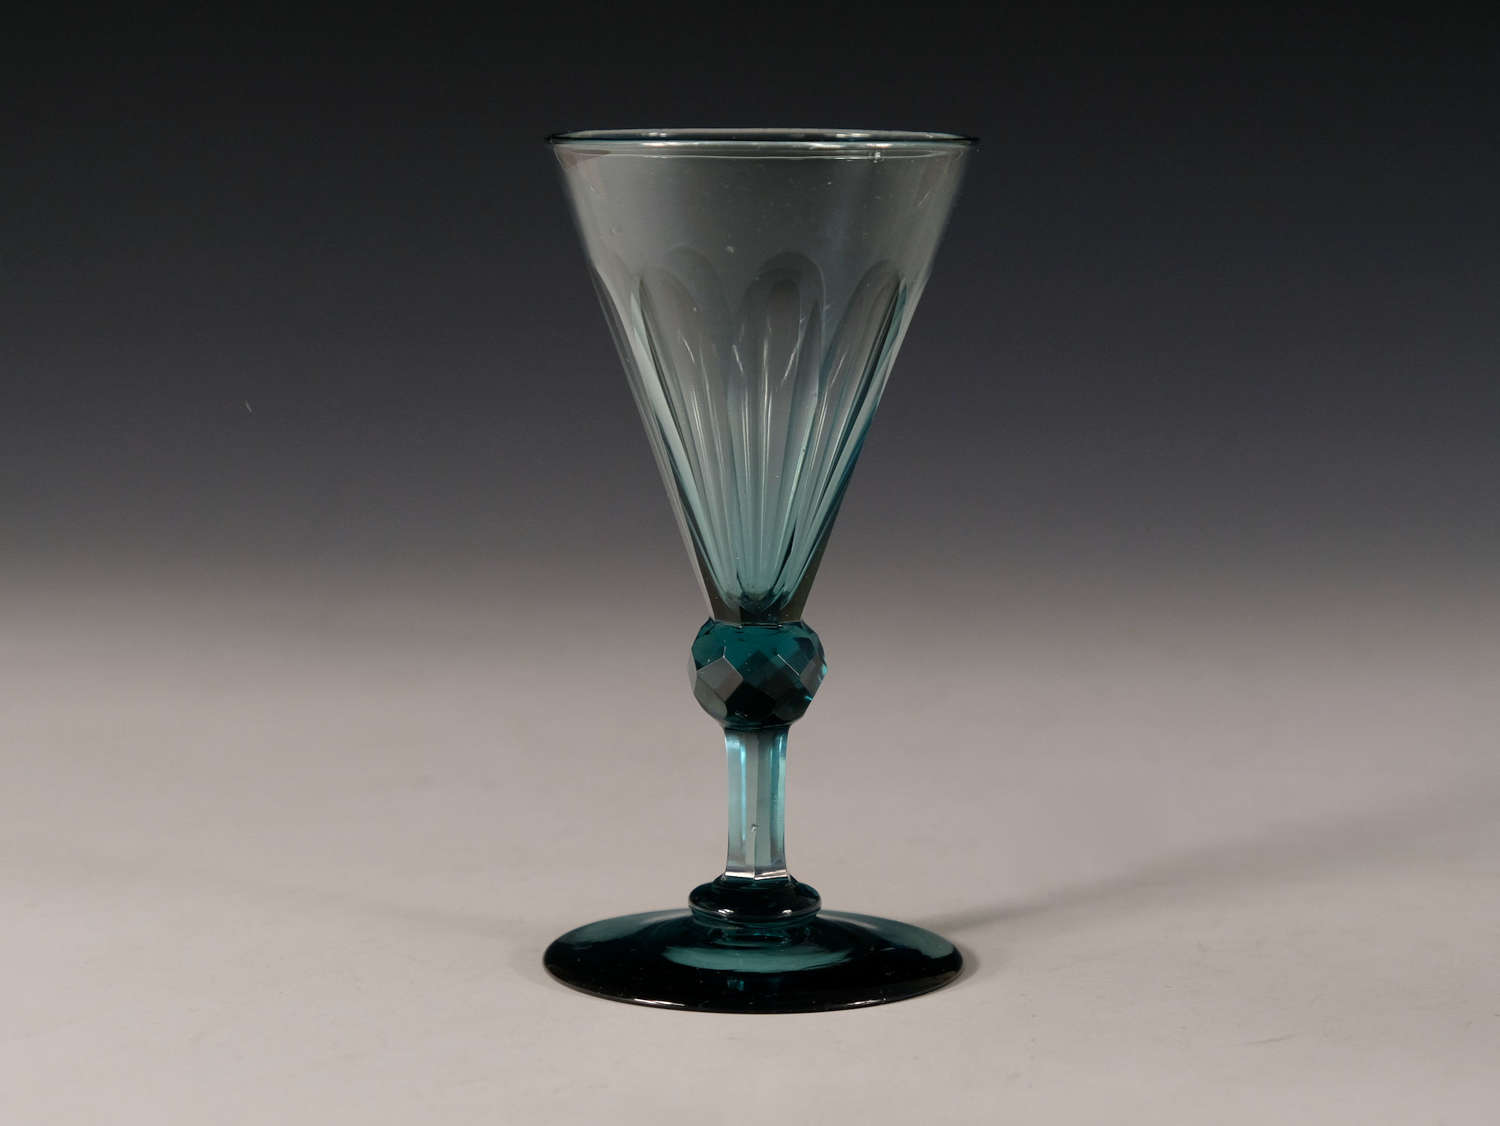 Antique wine glass teal English c1830